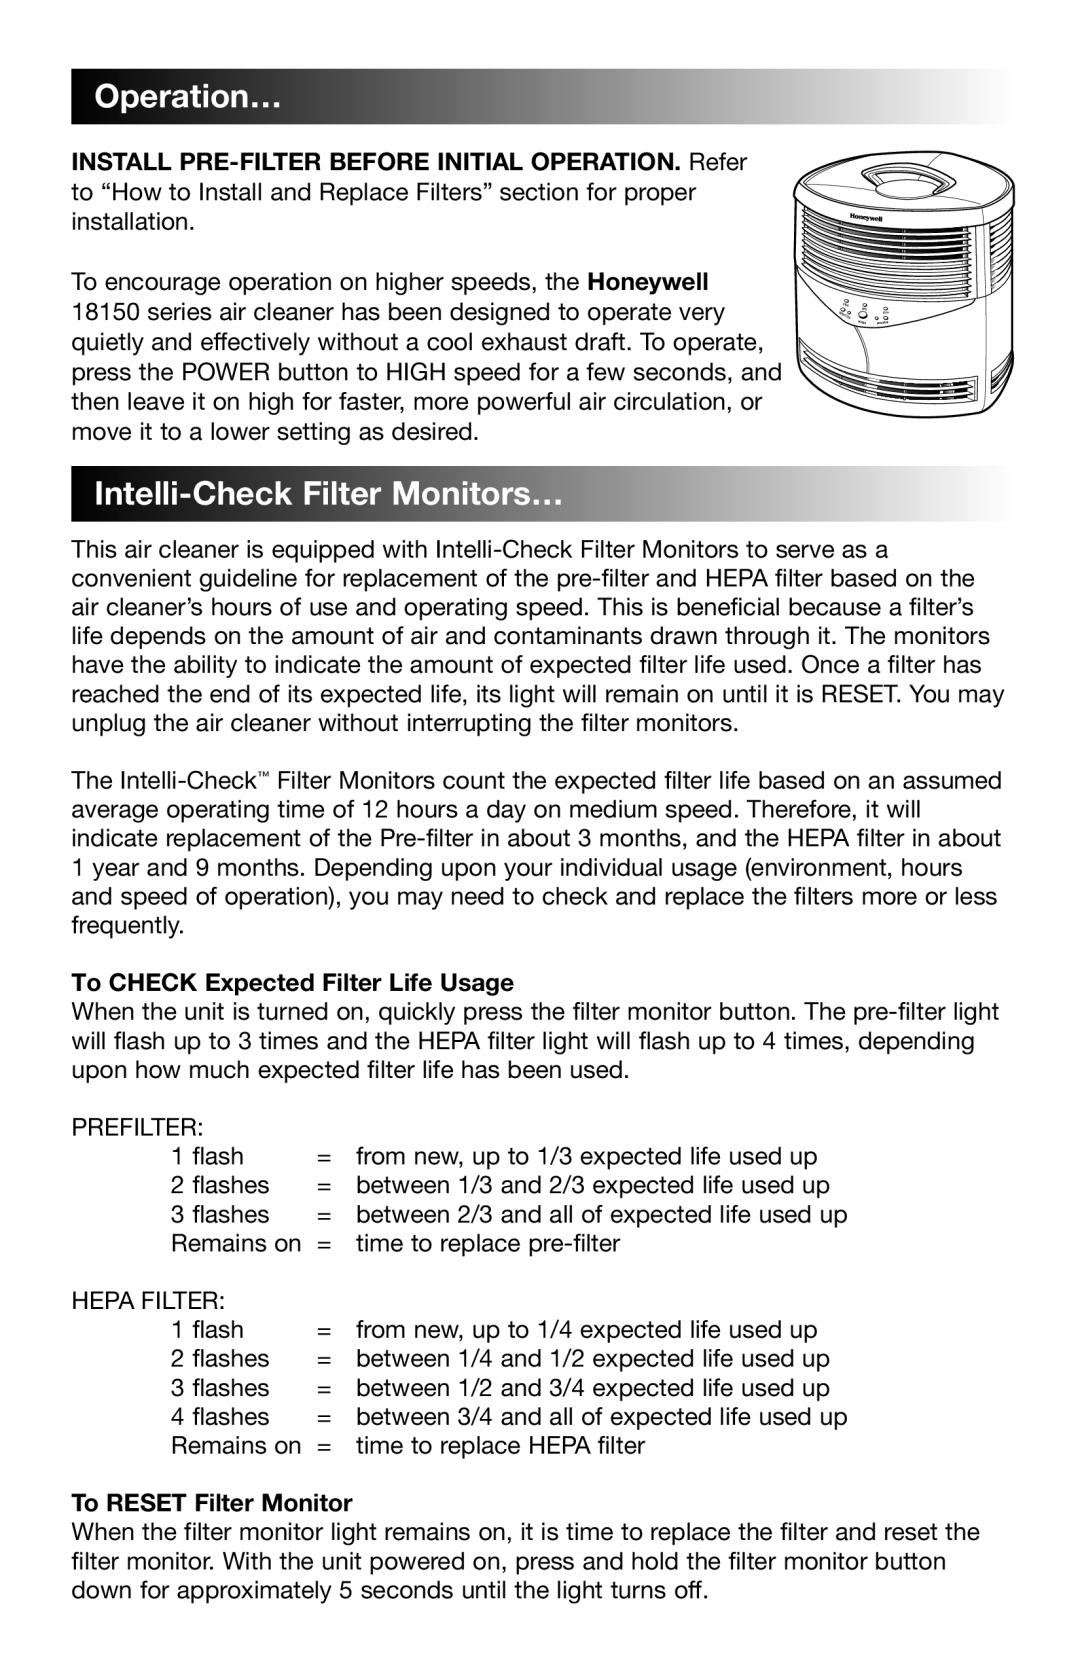 Honeywell 18150 Operation…, Intelli-CheckFilterMonitors…, To CHECK Expected Filter Life Usage, To RESET Filter Monitor 